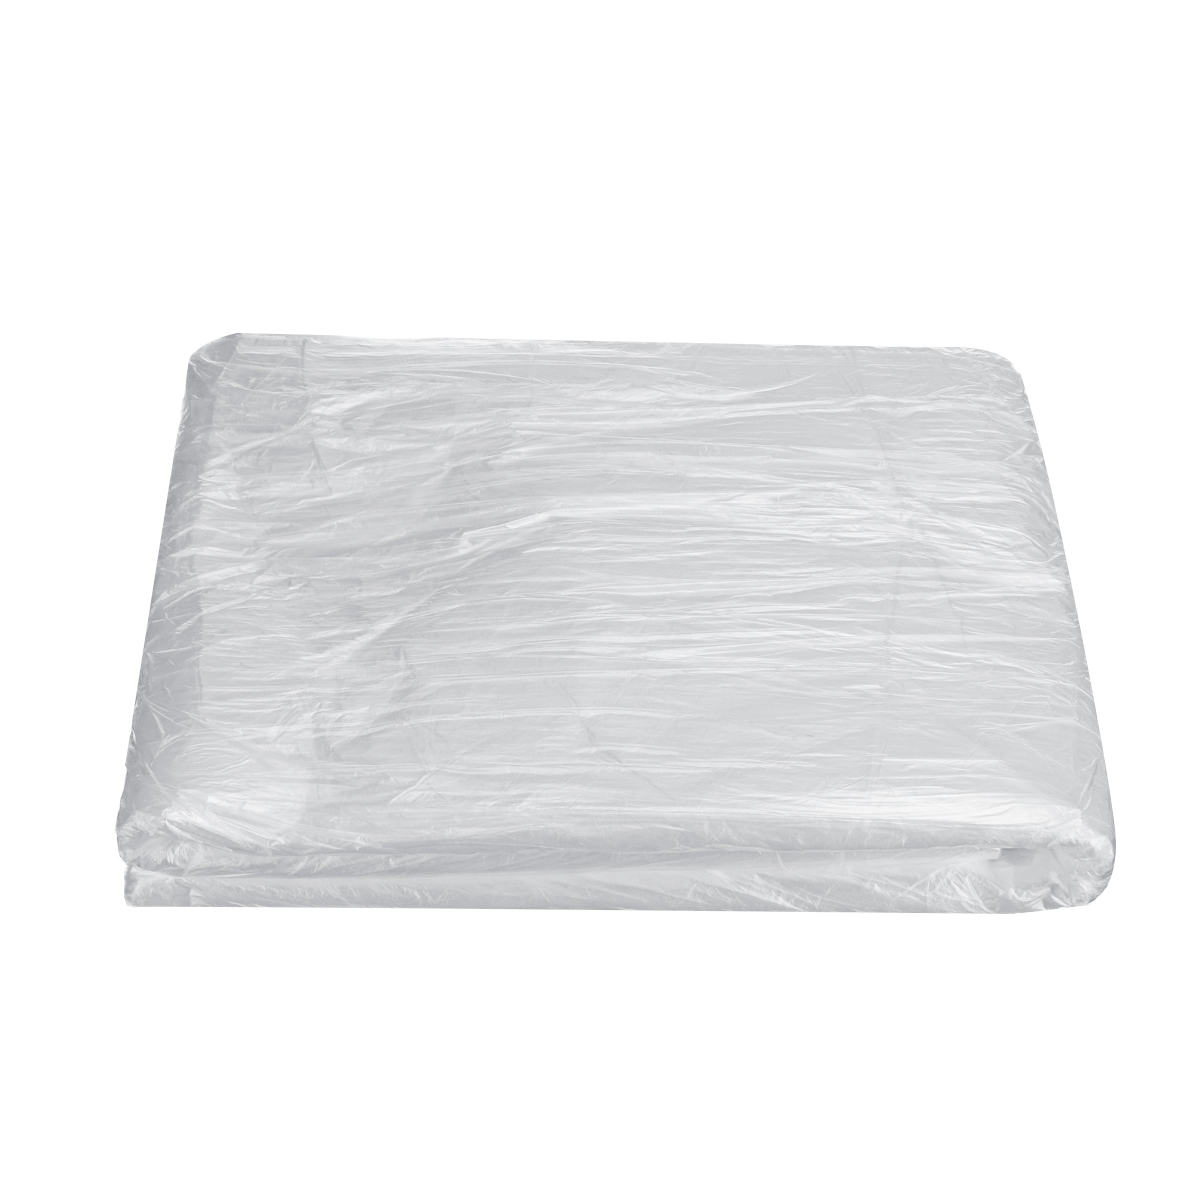 Find 100pcs Couch Cover For Massage Tables Bed Beauty Treatment Waxing Protection for Sale on Gipsybee.com with cryptocurrencies